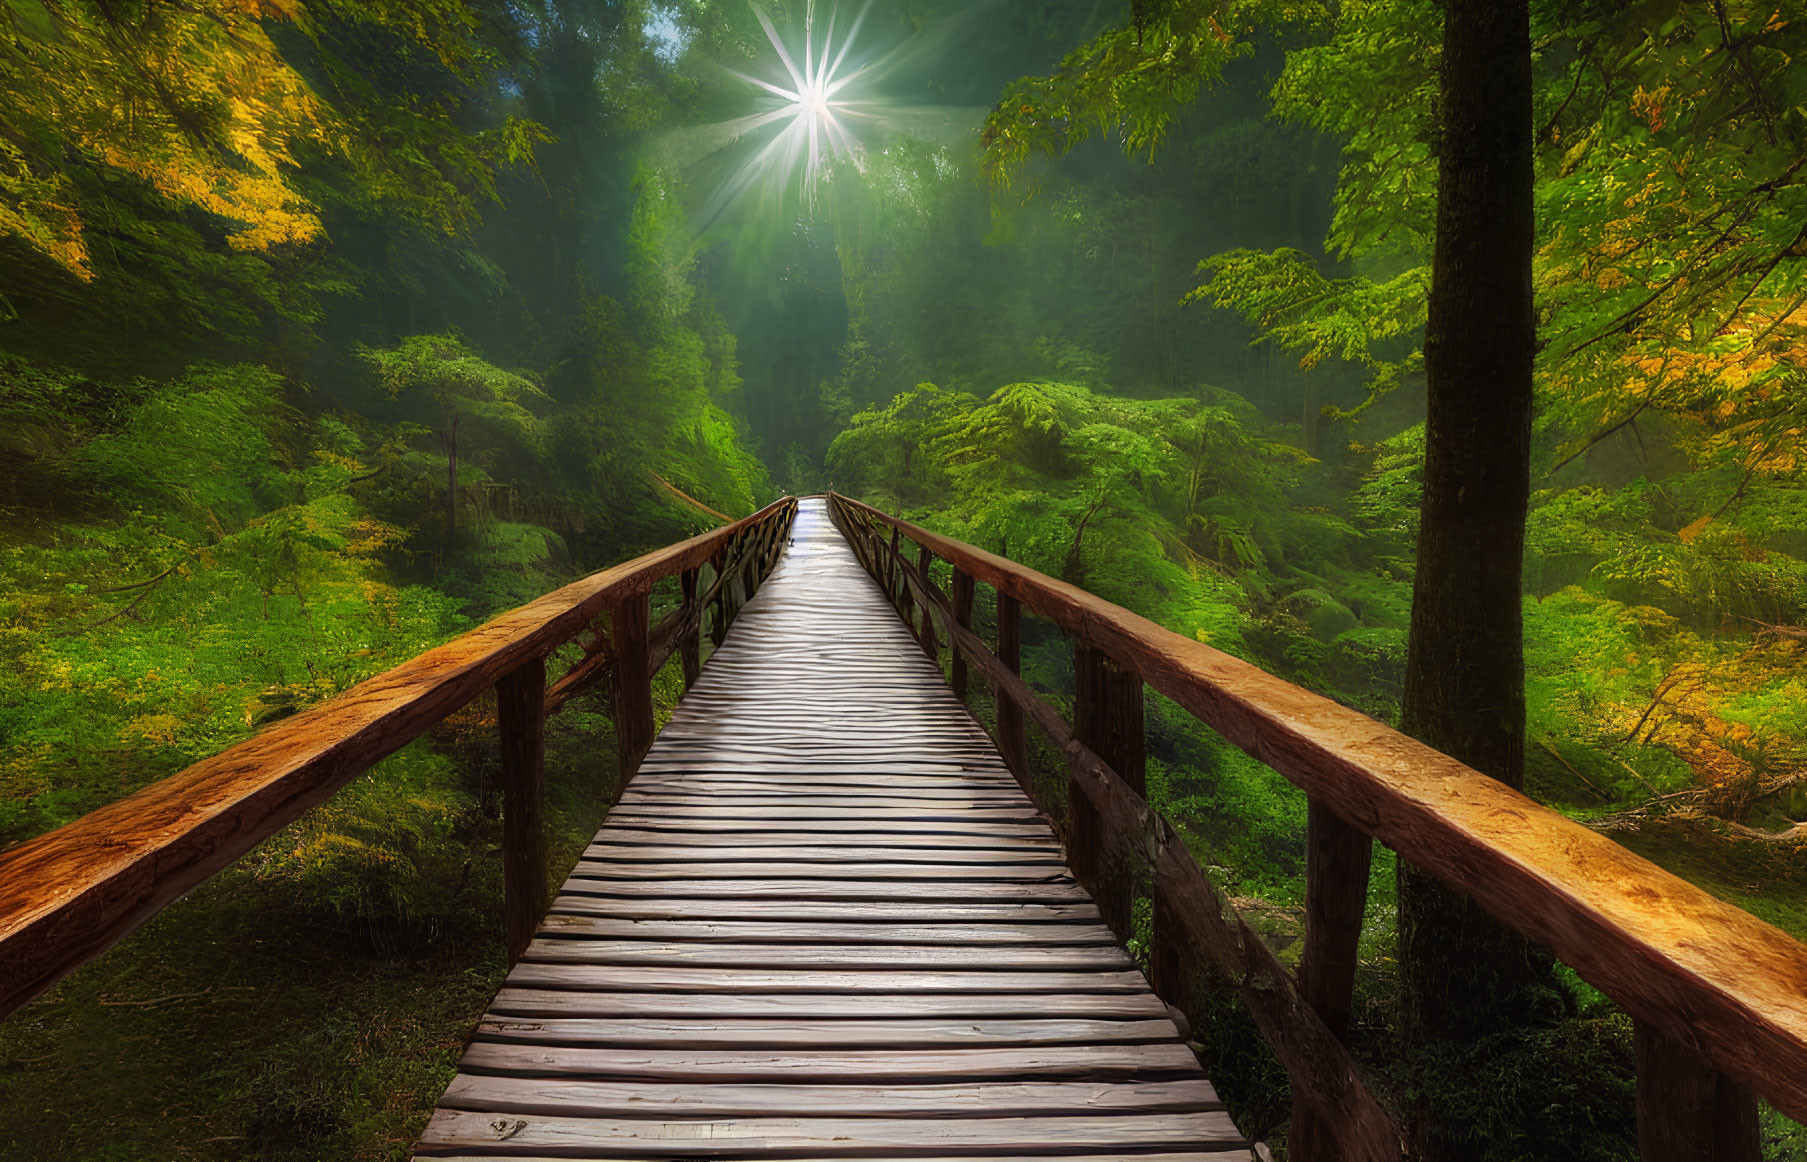 Wooden bridge in lush forest with sunlight filtering through canopy